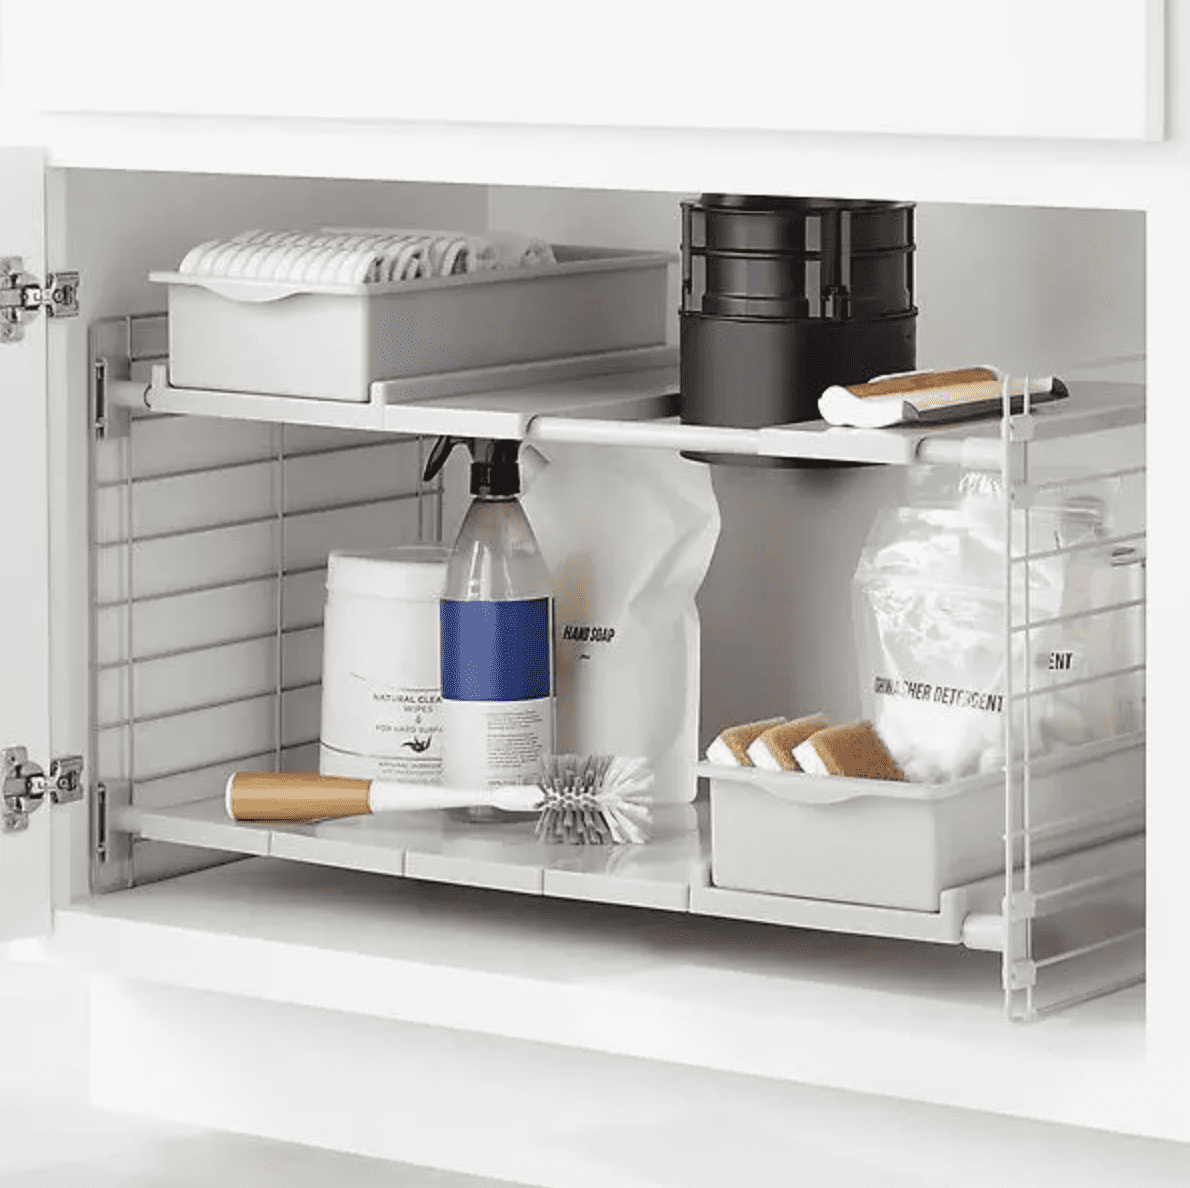 http://cdn.apartmenttherapy.info/image/upload/v1679501339/gen-workflow/product-database/Expandable_Under_Sink_Organizer.png